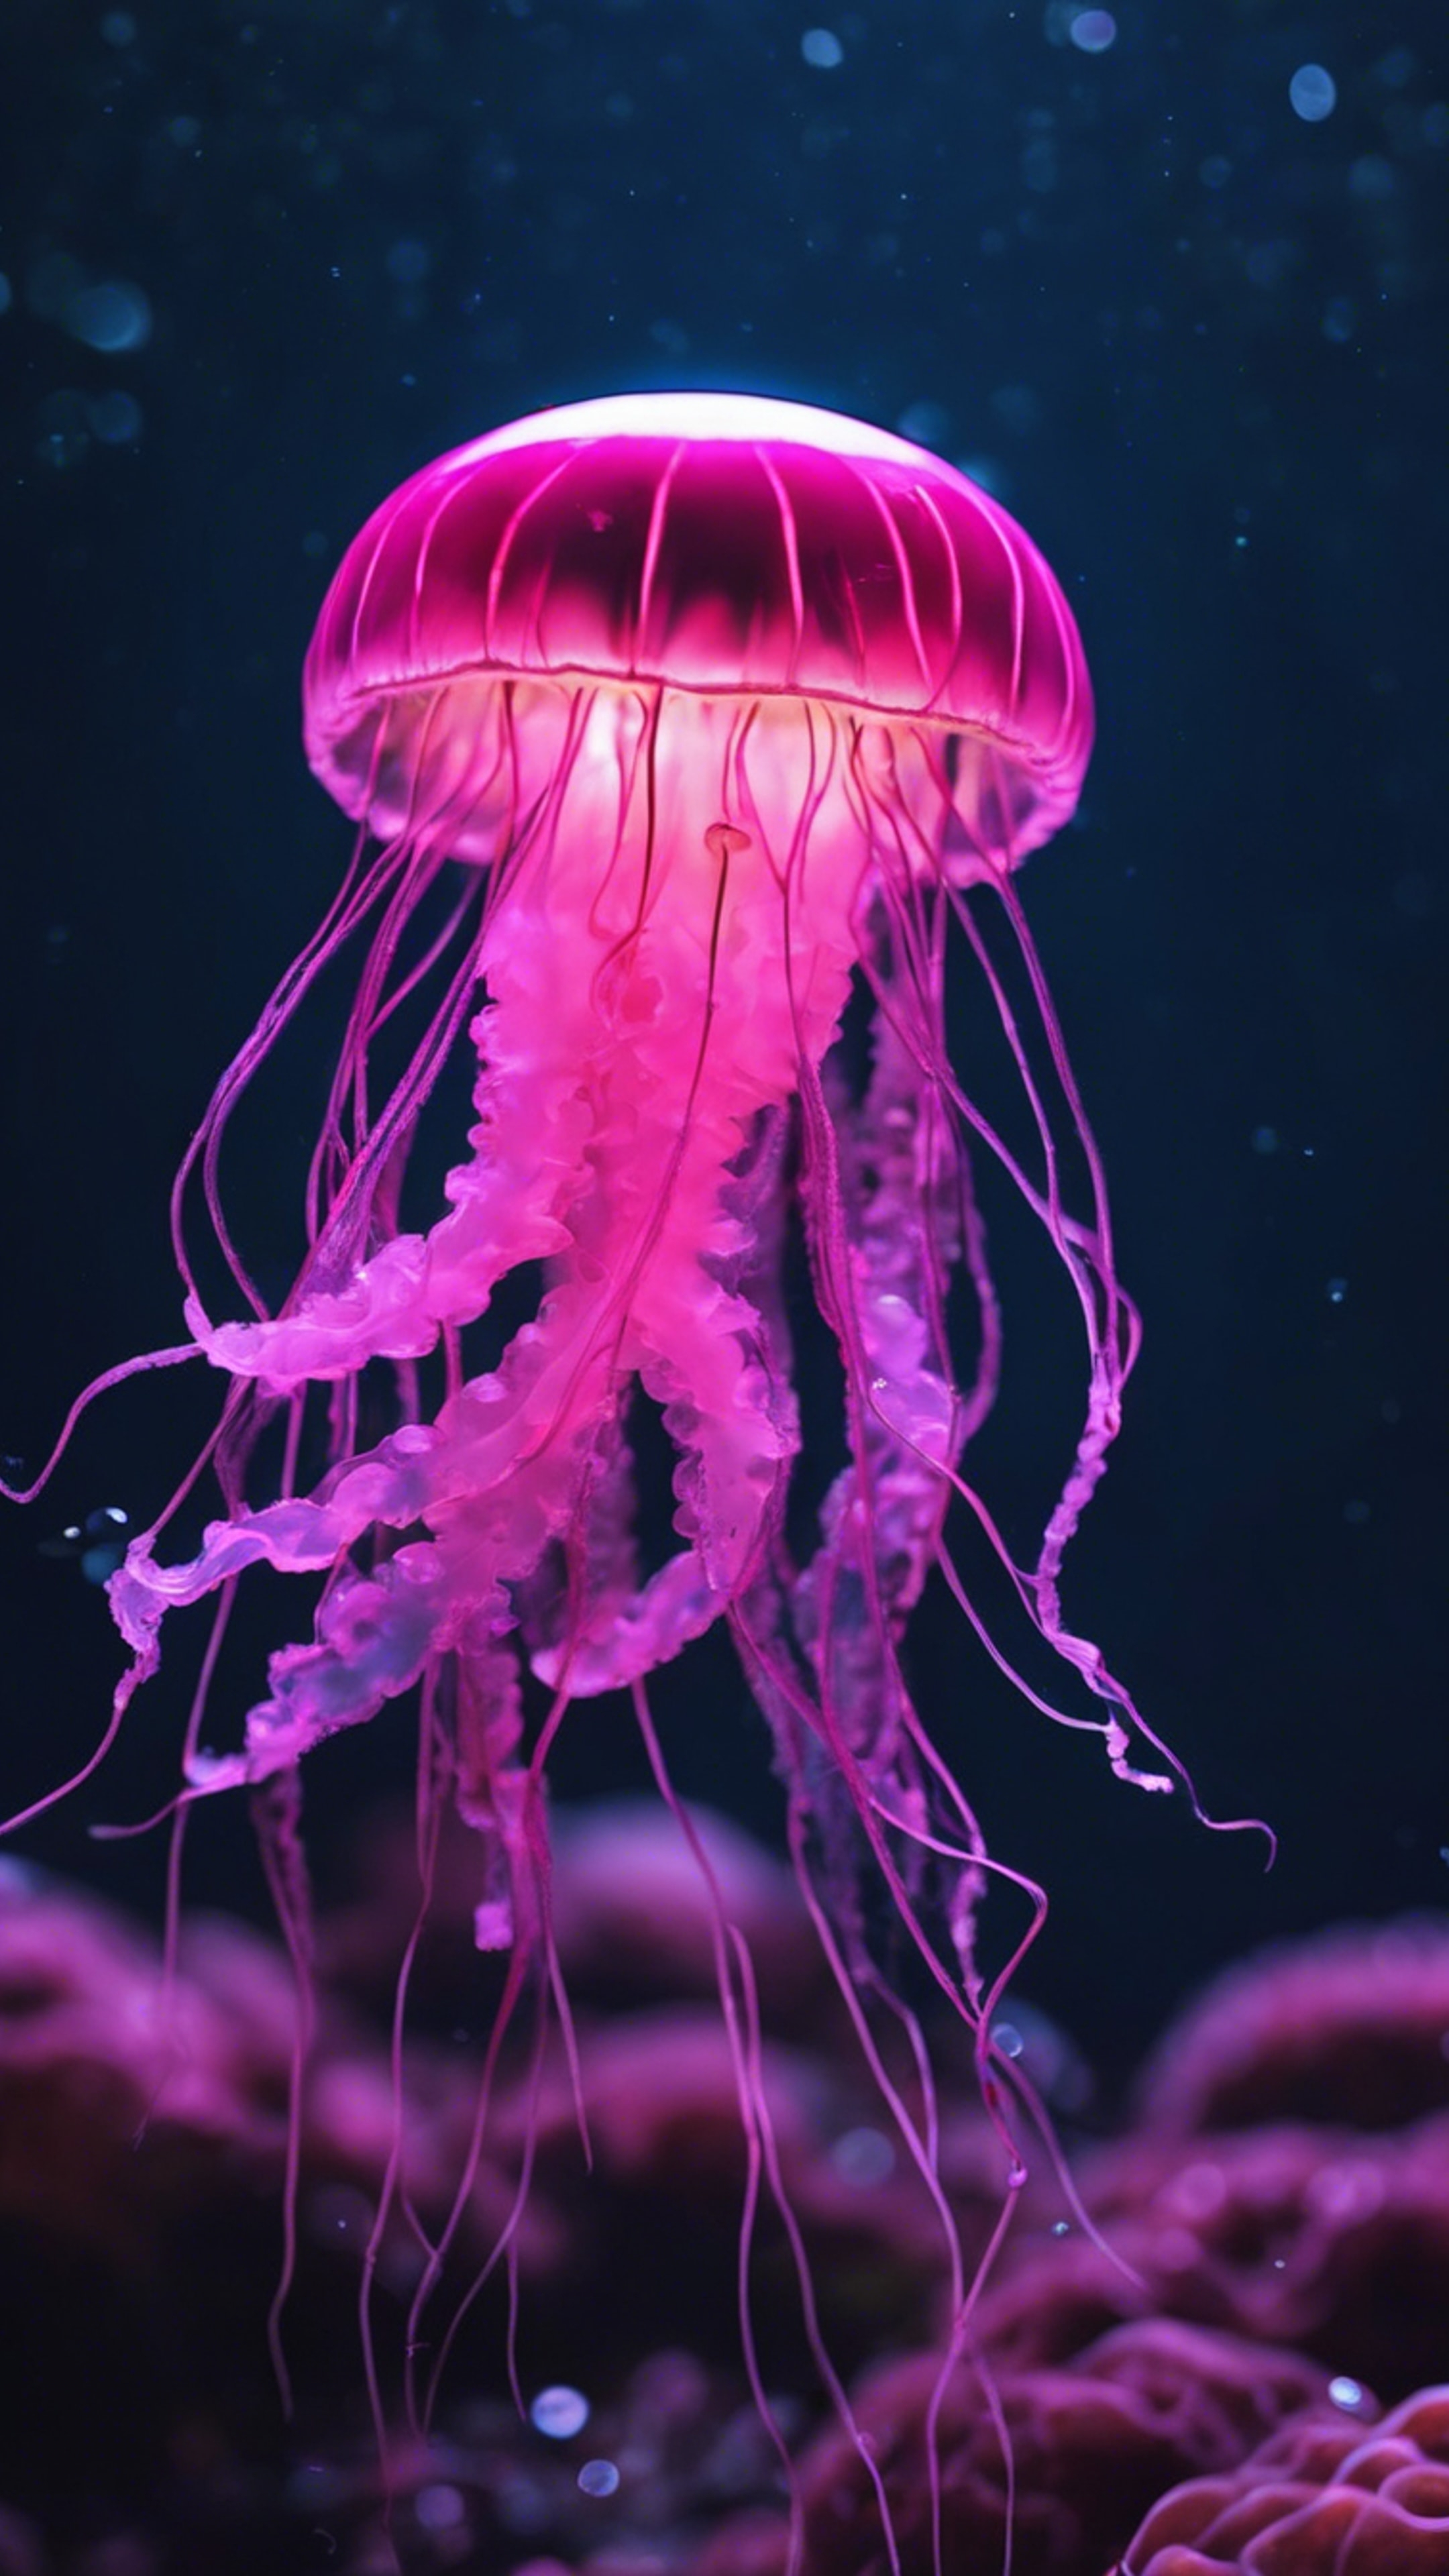 A shimmering neon pink jellyfish calmly floating in the deep sea.壁紙[5c6b7f4aae134a3f9d41]